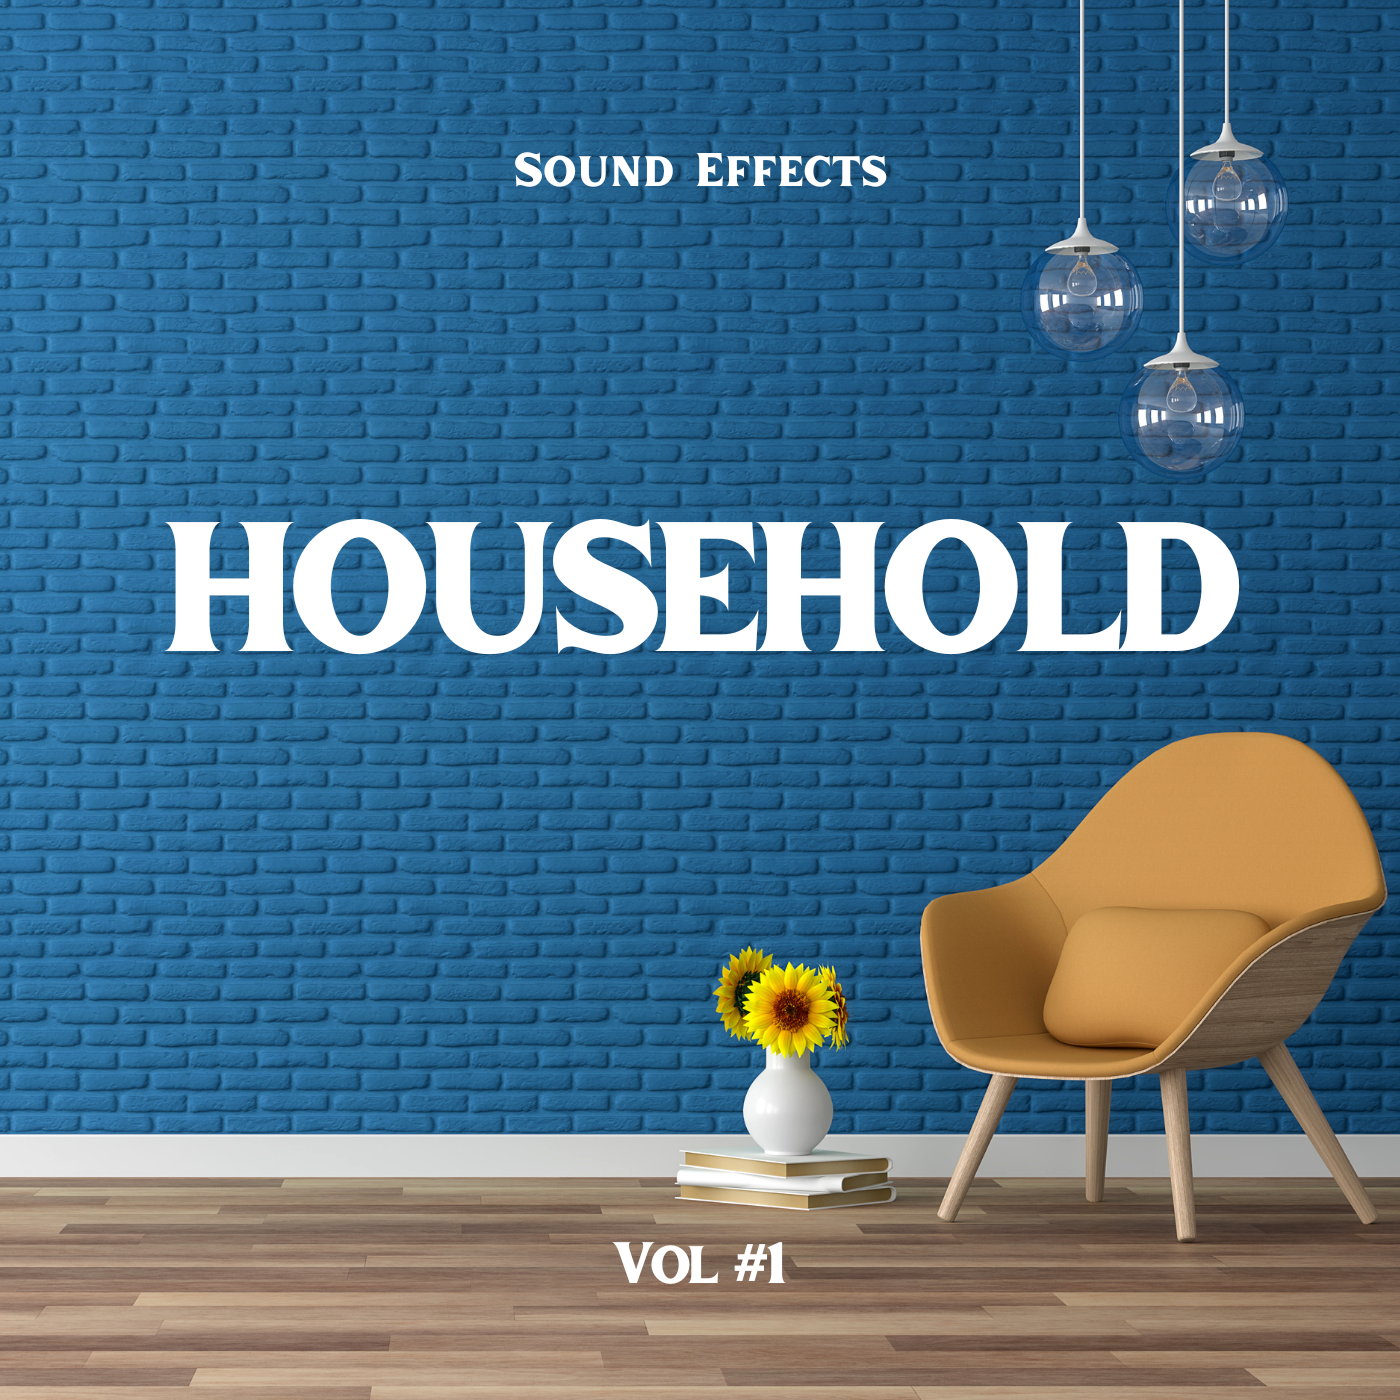 Household Sounds